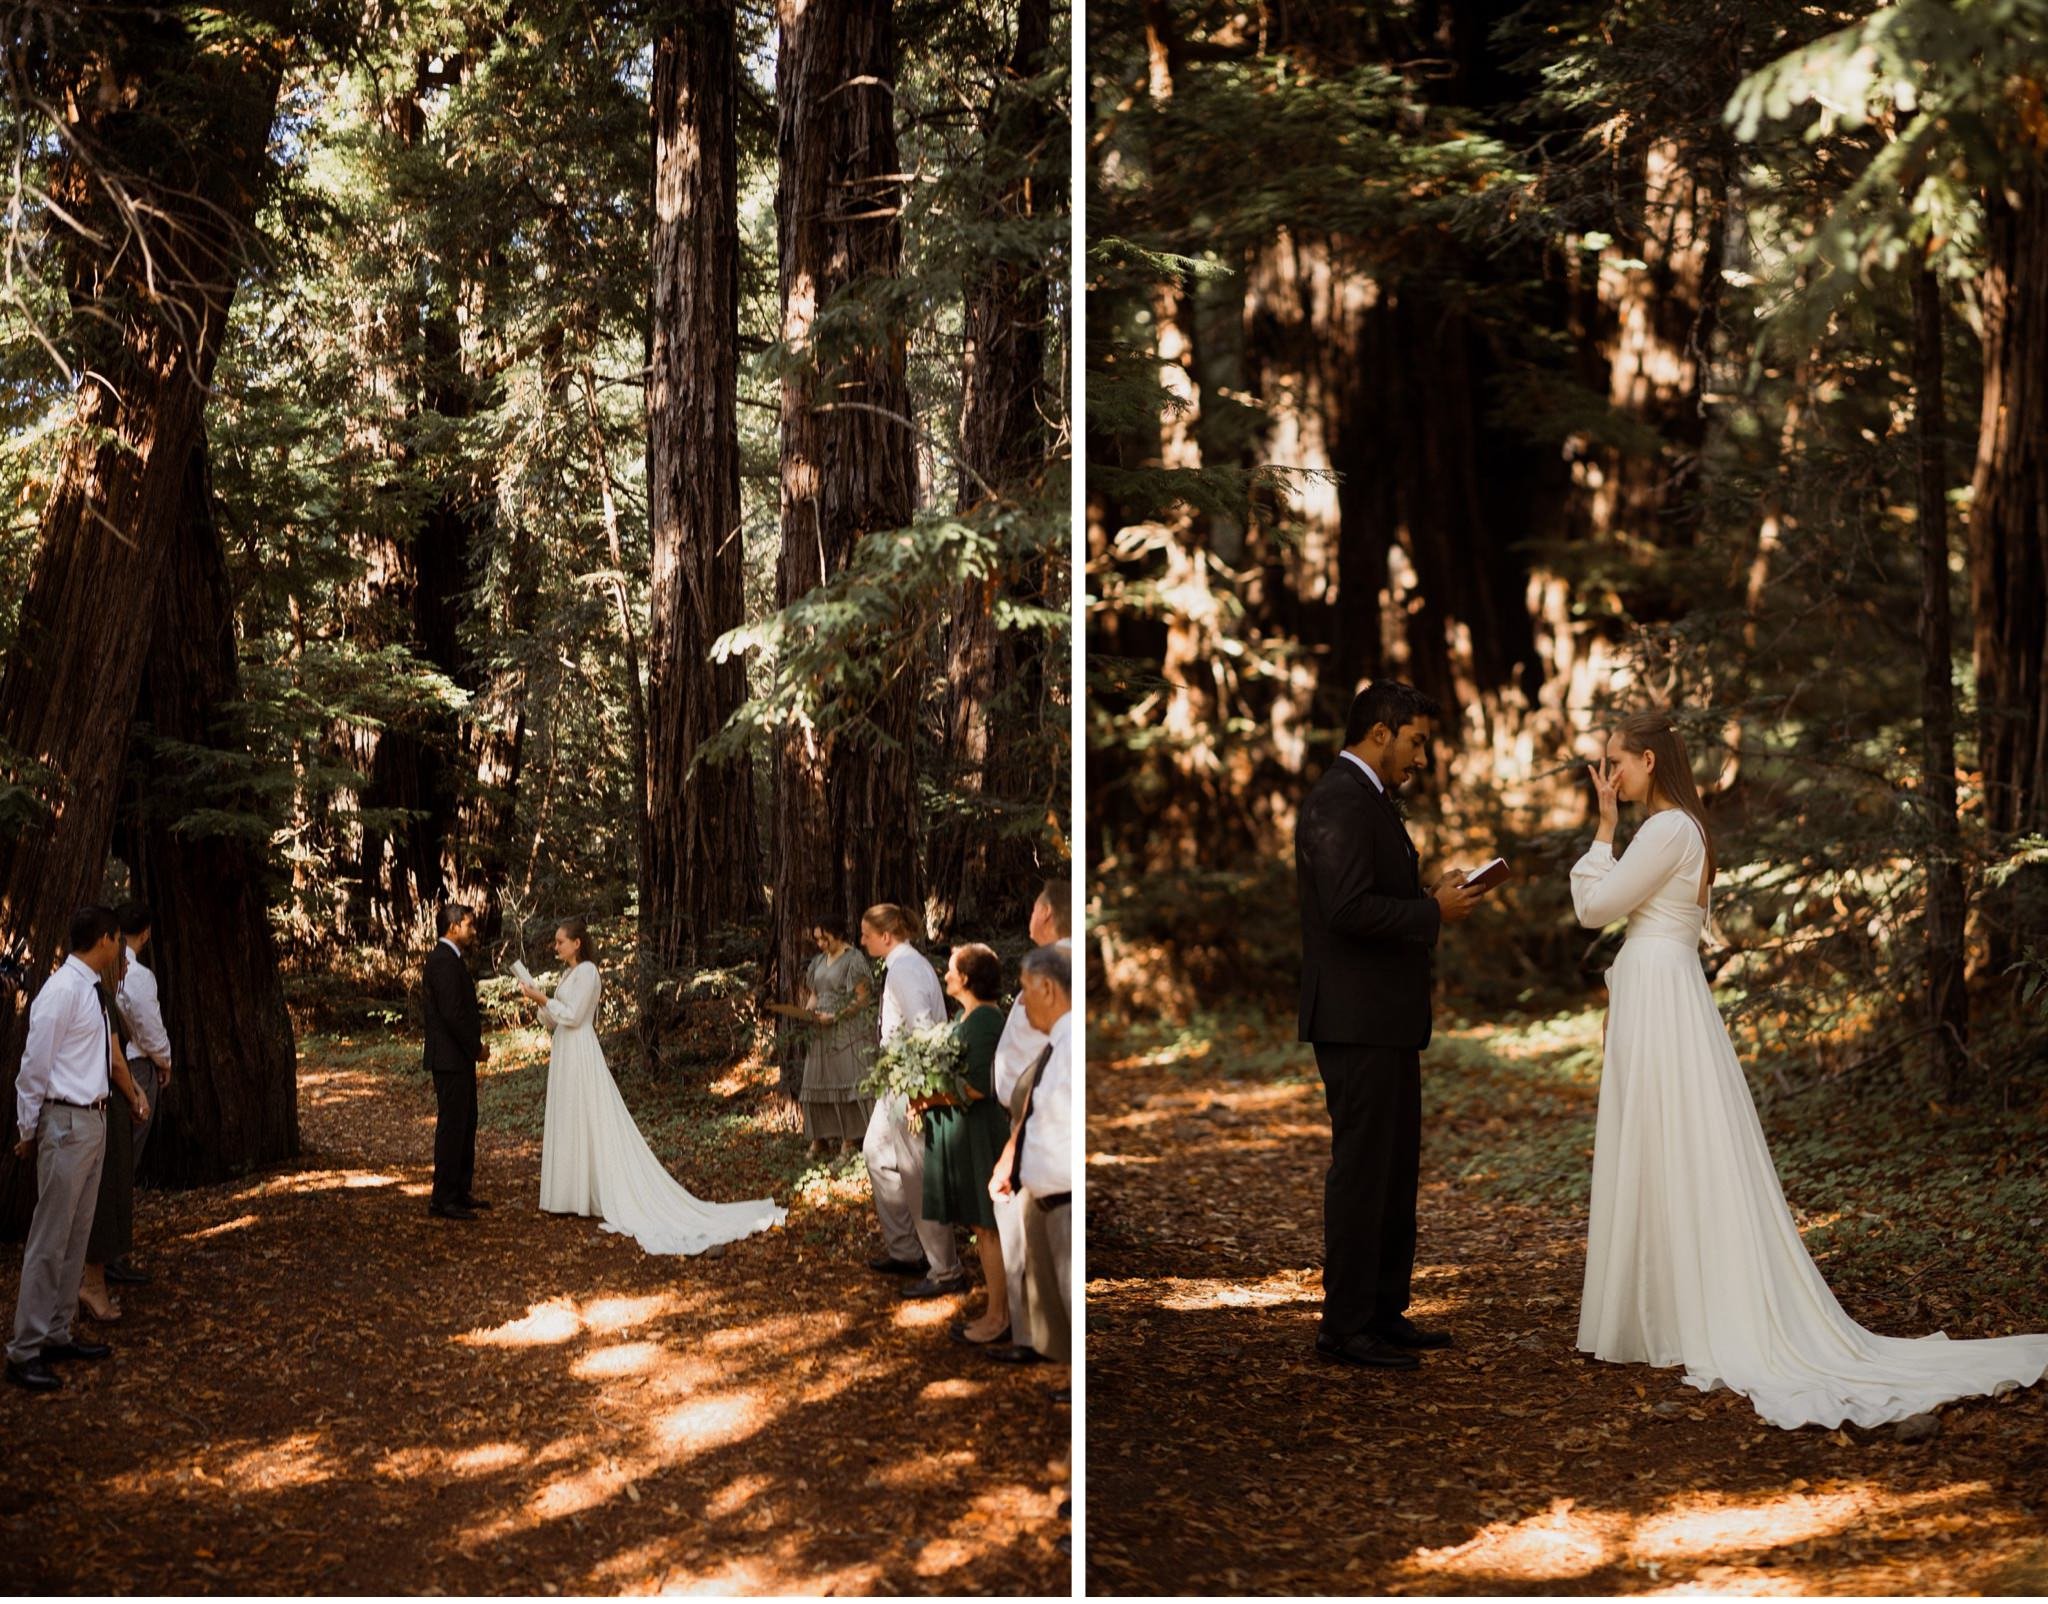 042_Two-Day Big Sur Redwoods Elopement with Family_Will Khoury Elopement Photographer.jpg